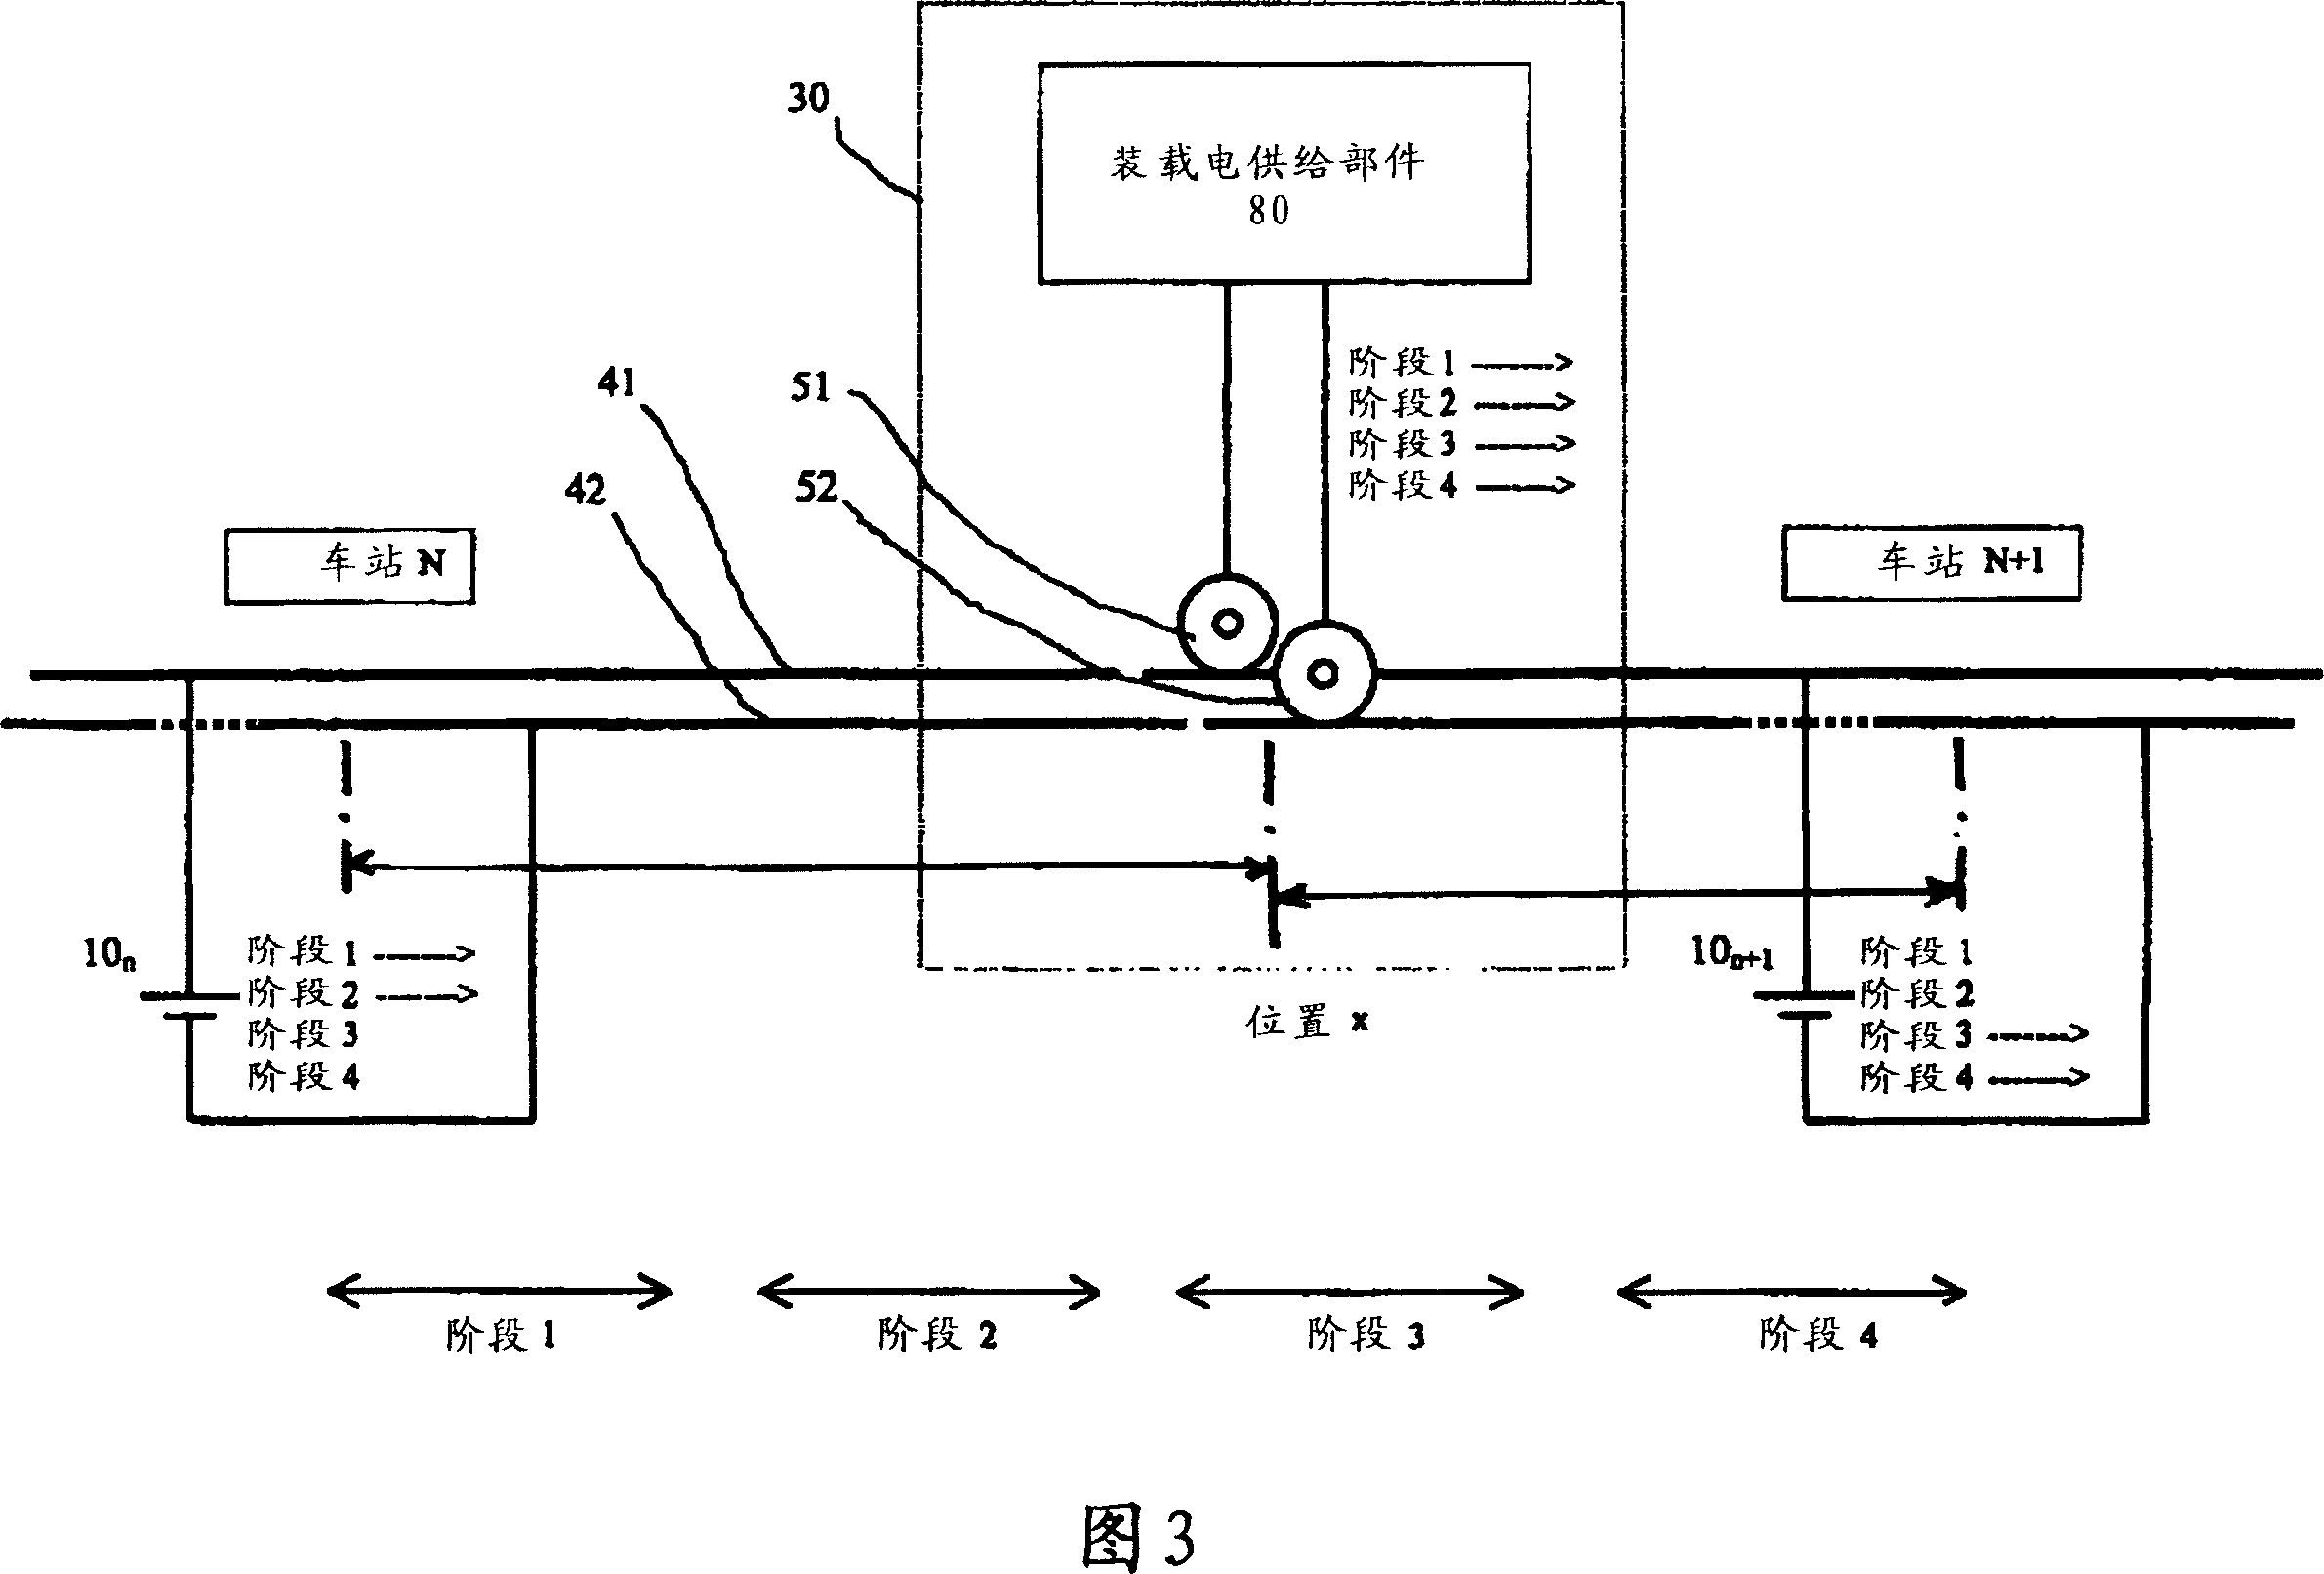 System for supplying very low voltage electrical energy for an electrical traction vehicle comprising an onboard store of energy